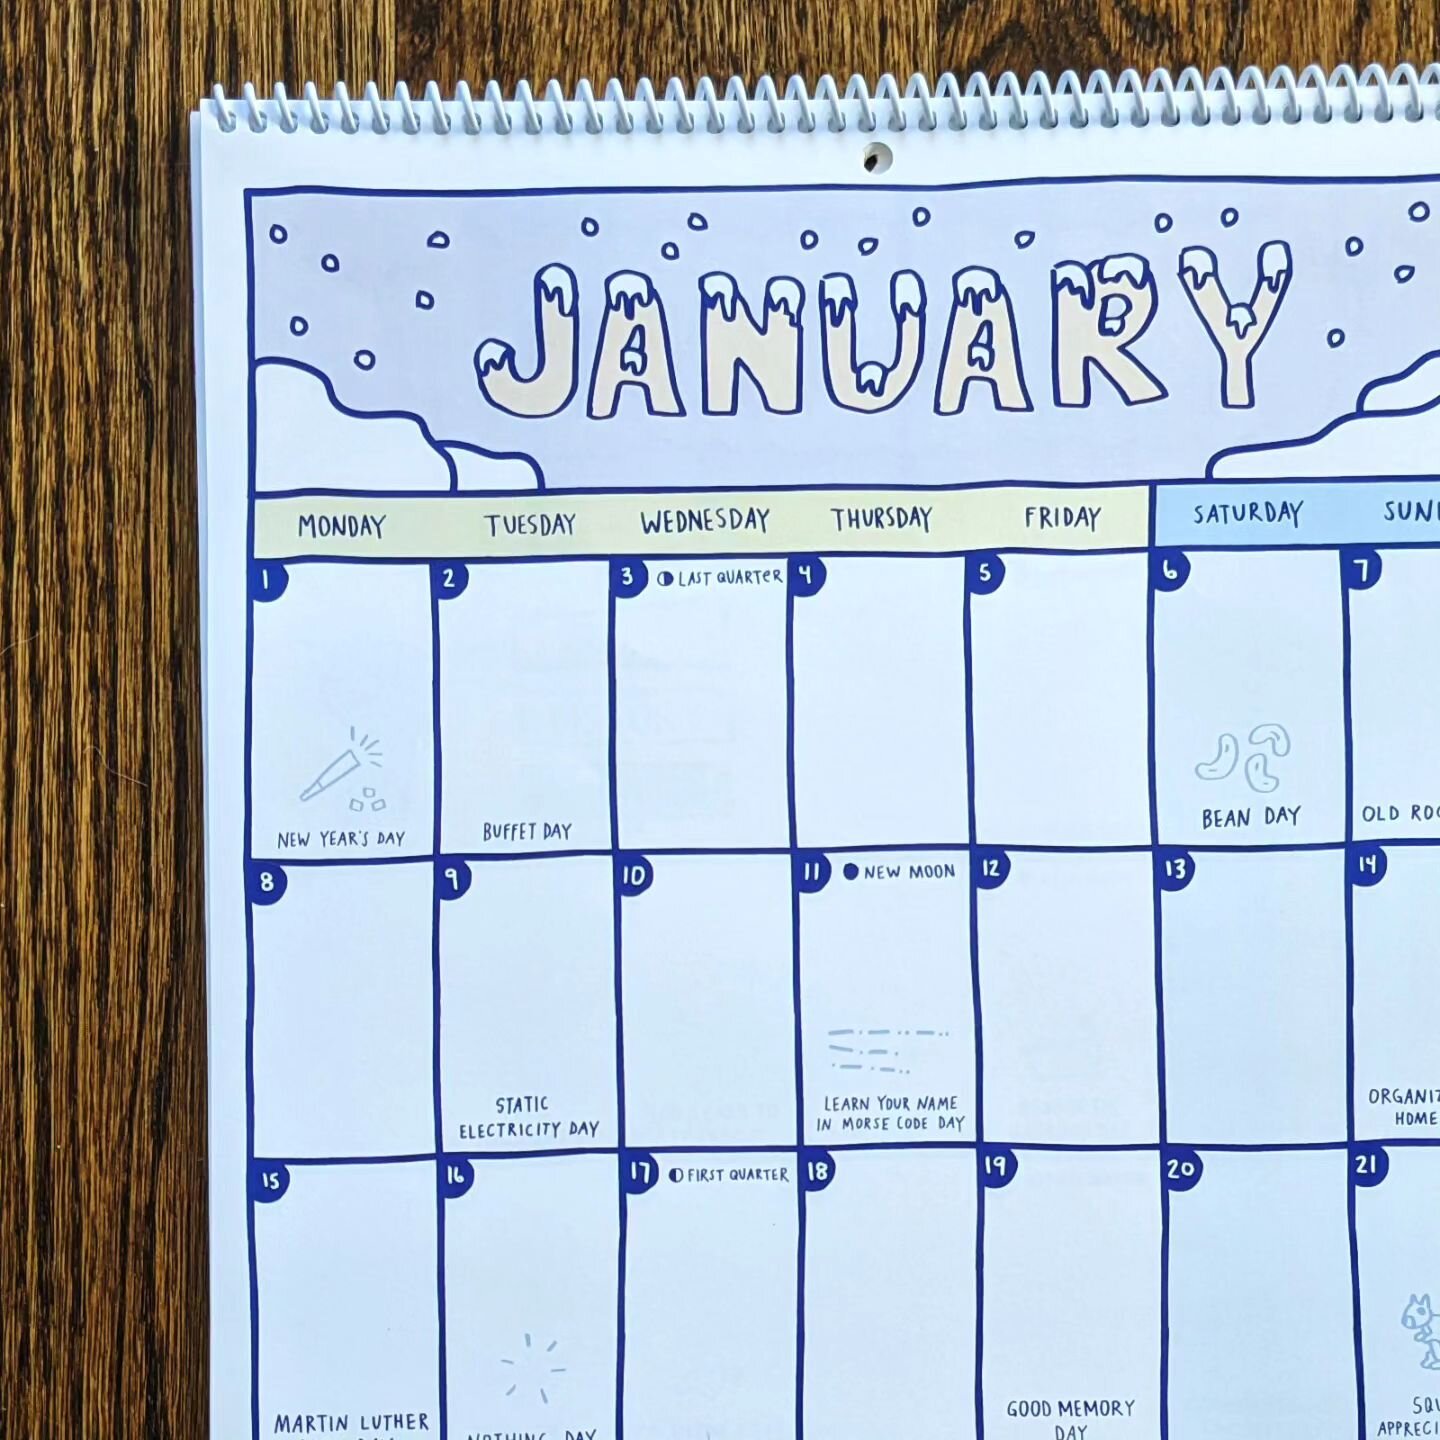 Happy New Year!! Over here mentally getting ready for Buffet Day tomorrow 👀 Send us your pics and tell us how you started Kid Cal-ing this year 🎉

#kidcal #kidsactivities #stickers #kids #organization #calendar #kidcalendar